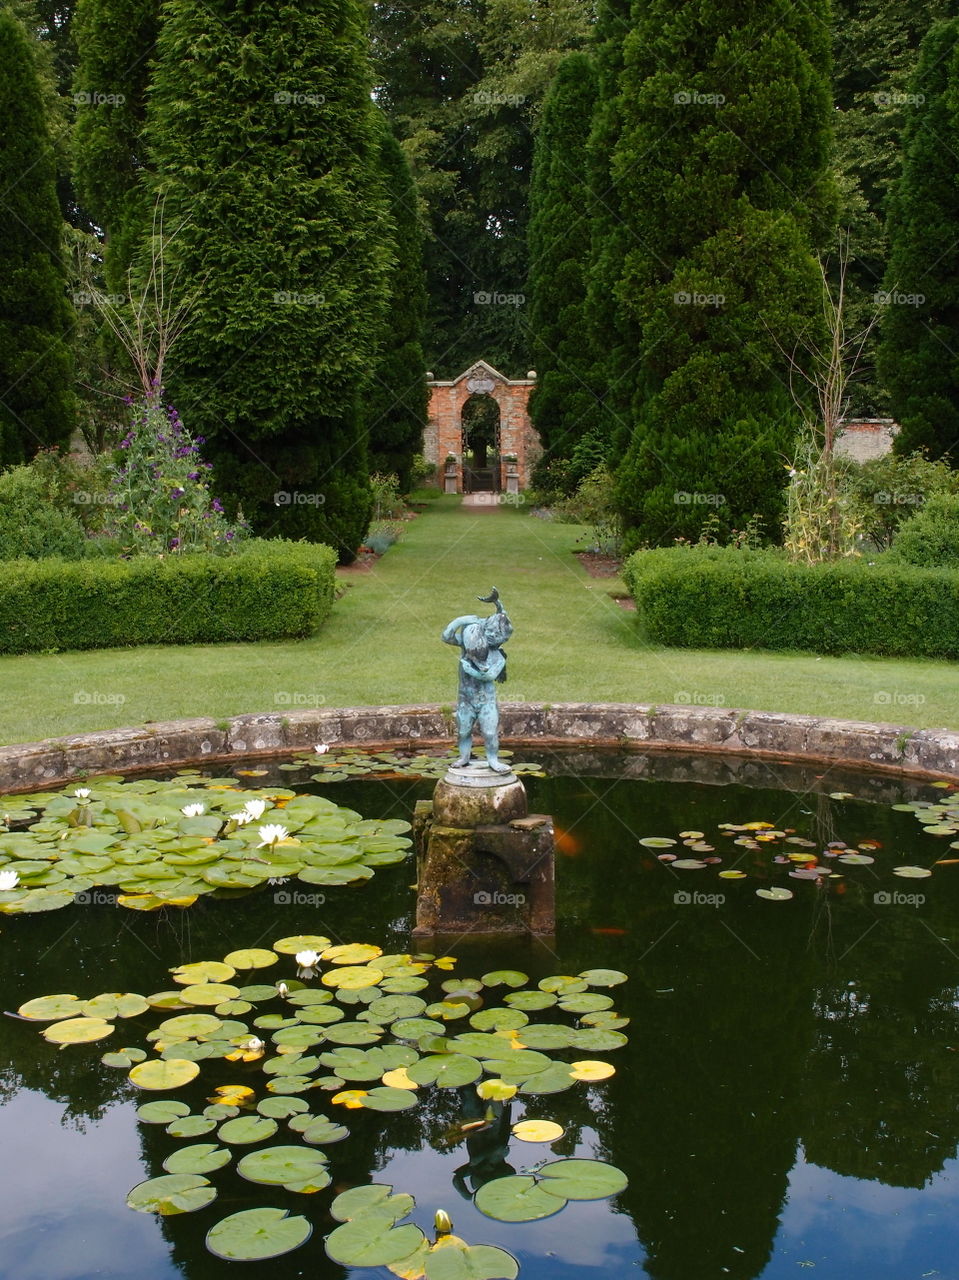 Reflections and floating Lilly Pads in a fountain in lushly landscaped gardens with shaped bushes, manicured lawns, a statue, and a stone arch on a summer day in England. 